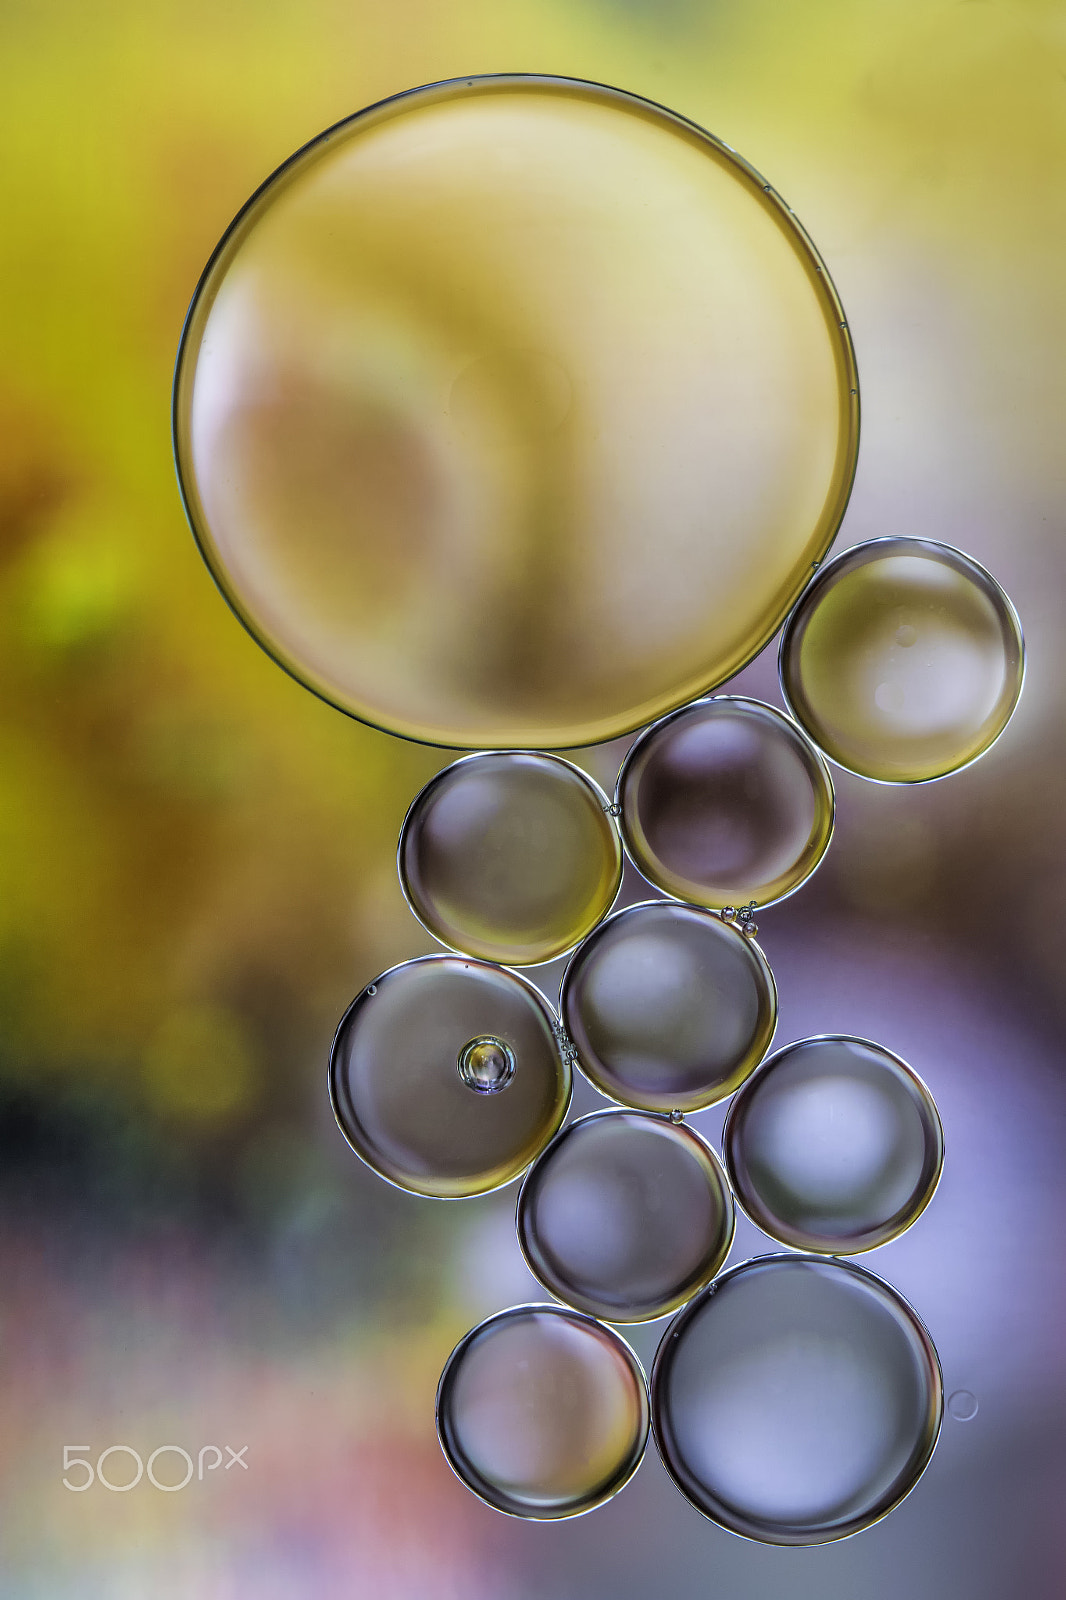 Nikon D5300 + Tamron SP 90mm F2.8 Di VC USD 1:1 Macro (F004) sample photo. Oil and water photography